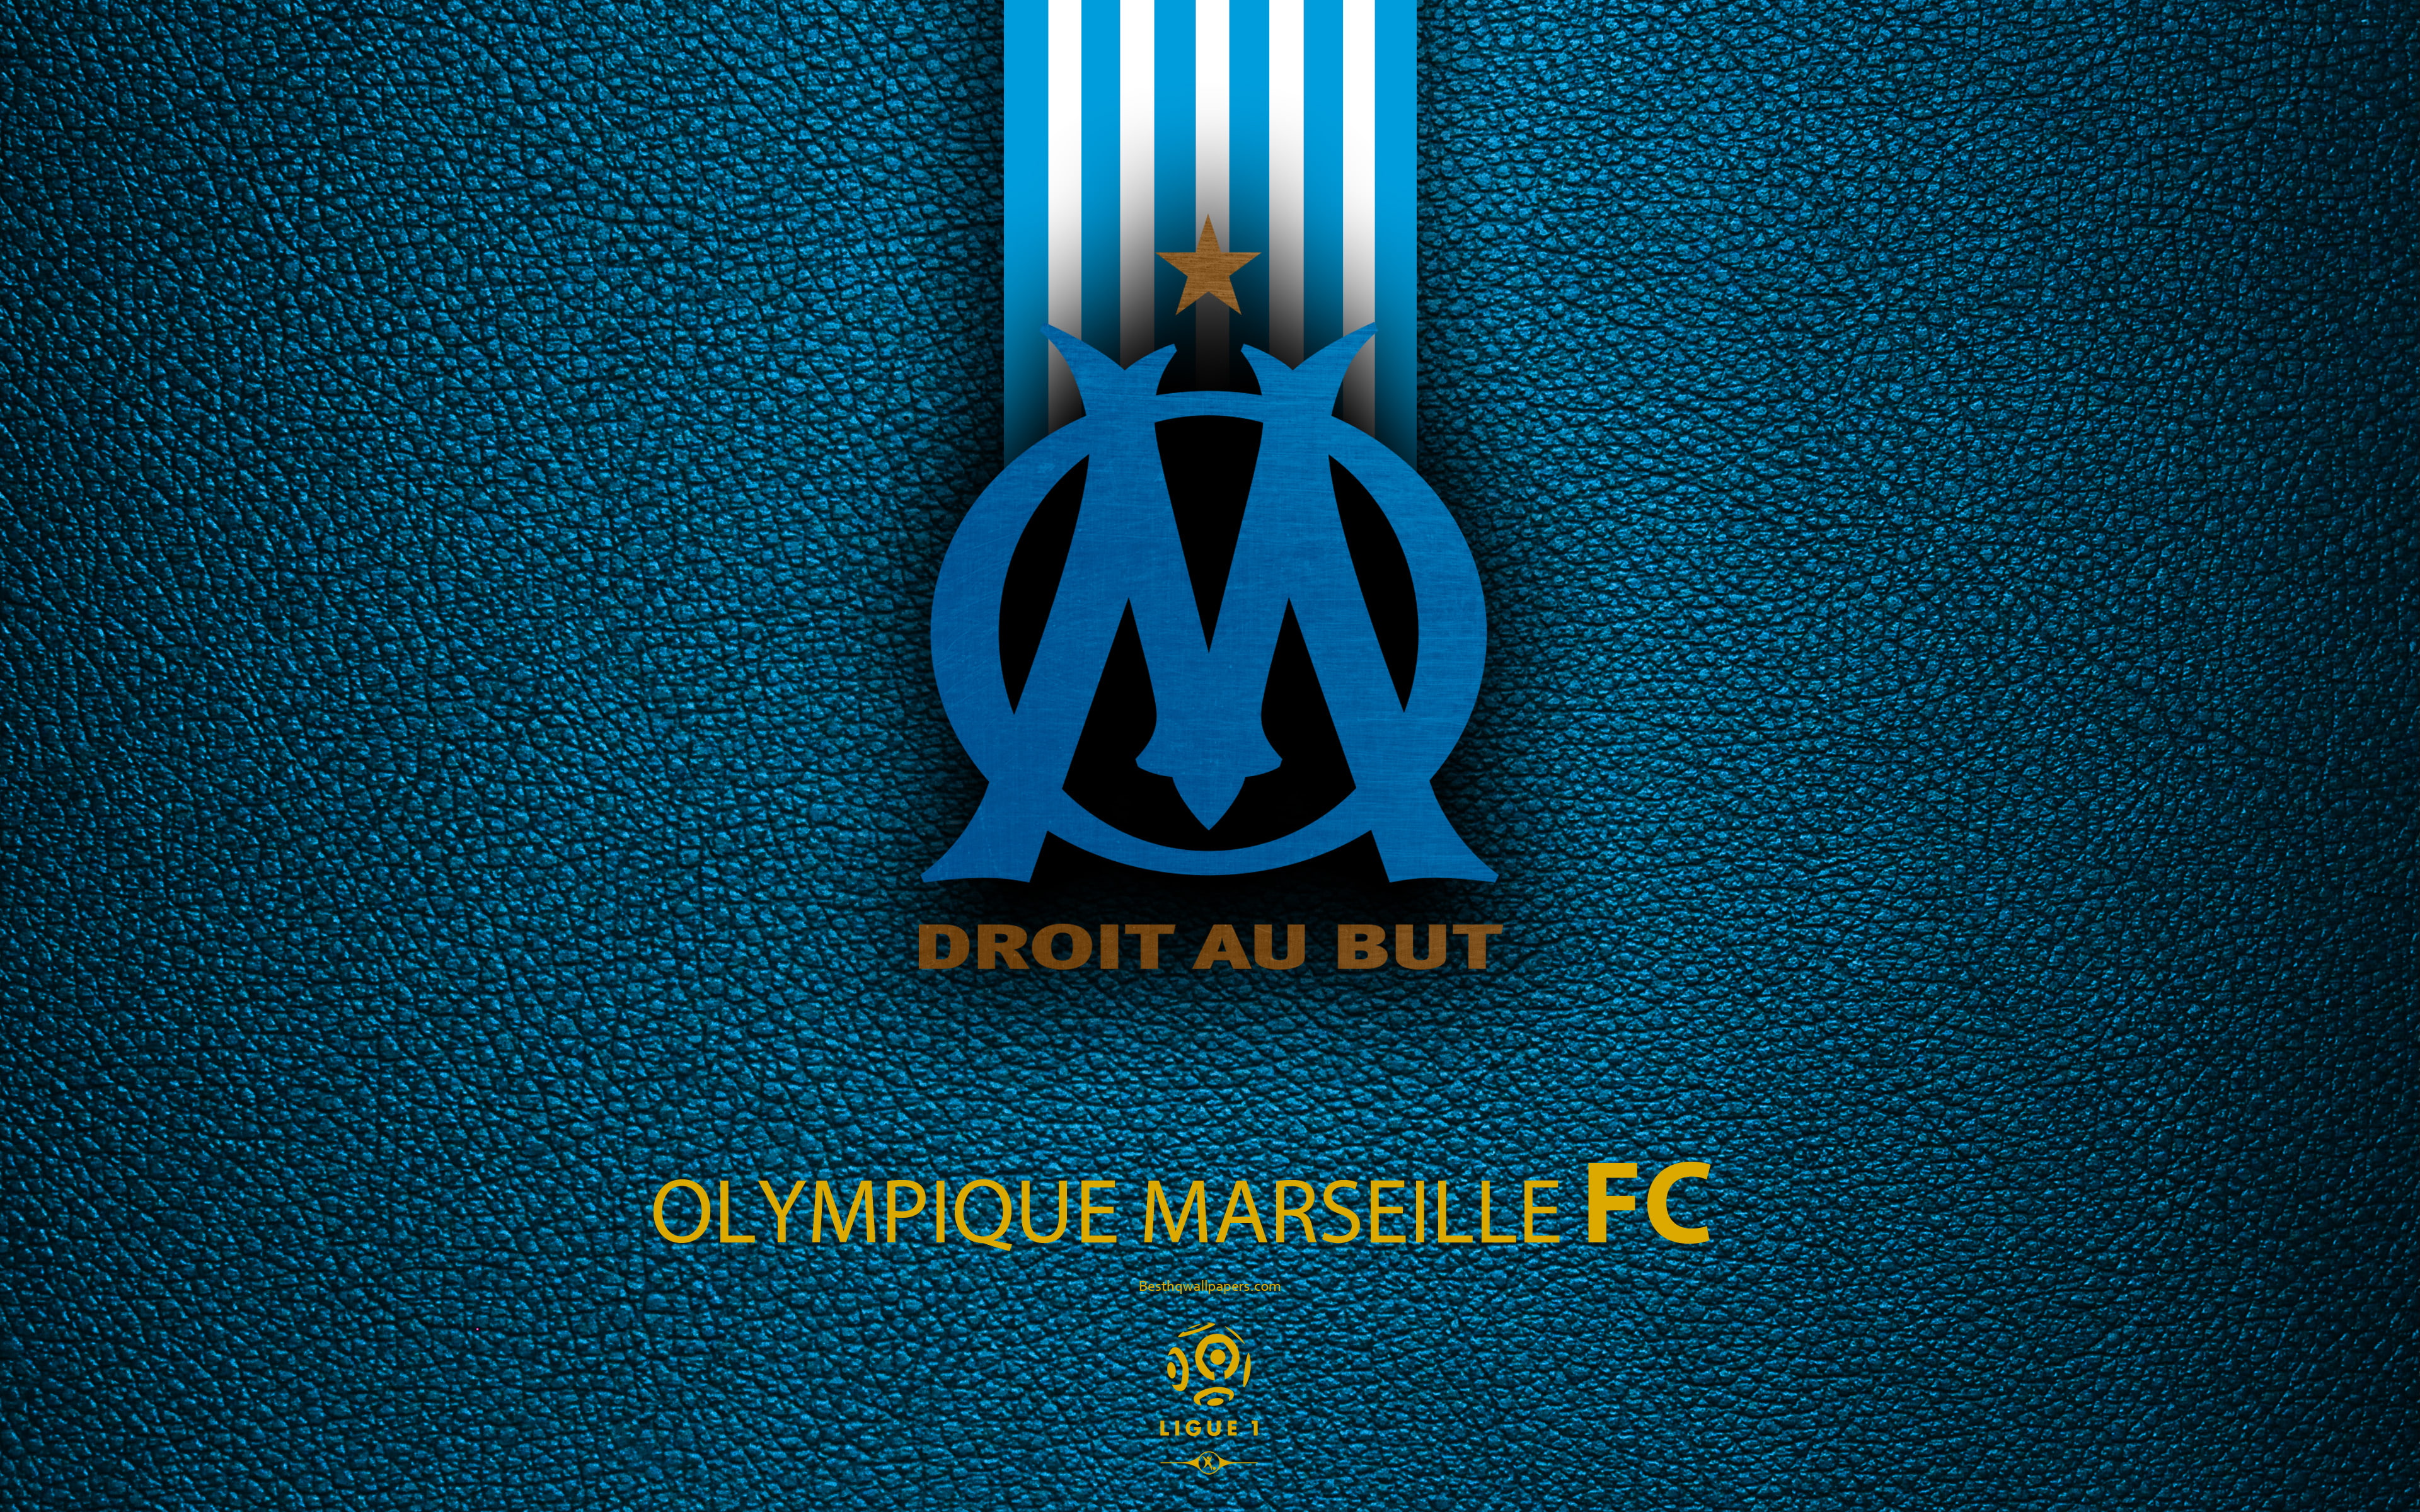 marseille, olympique, soccer, sports